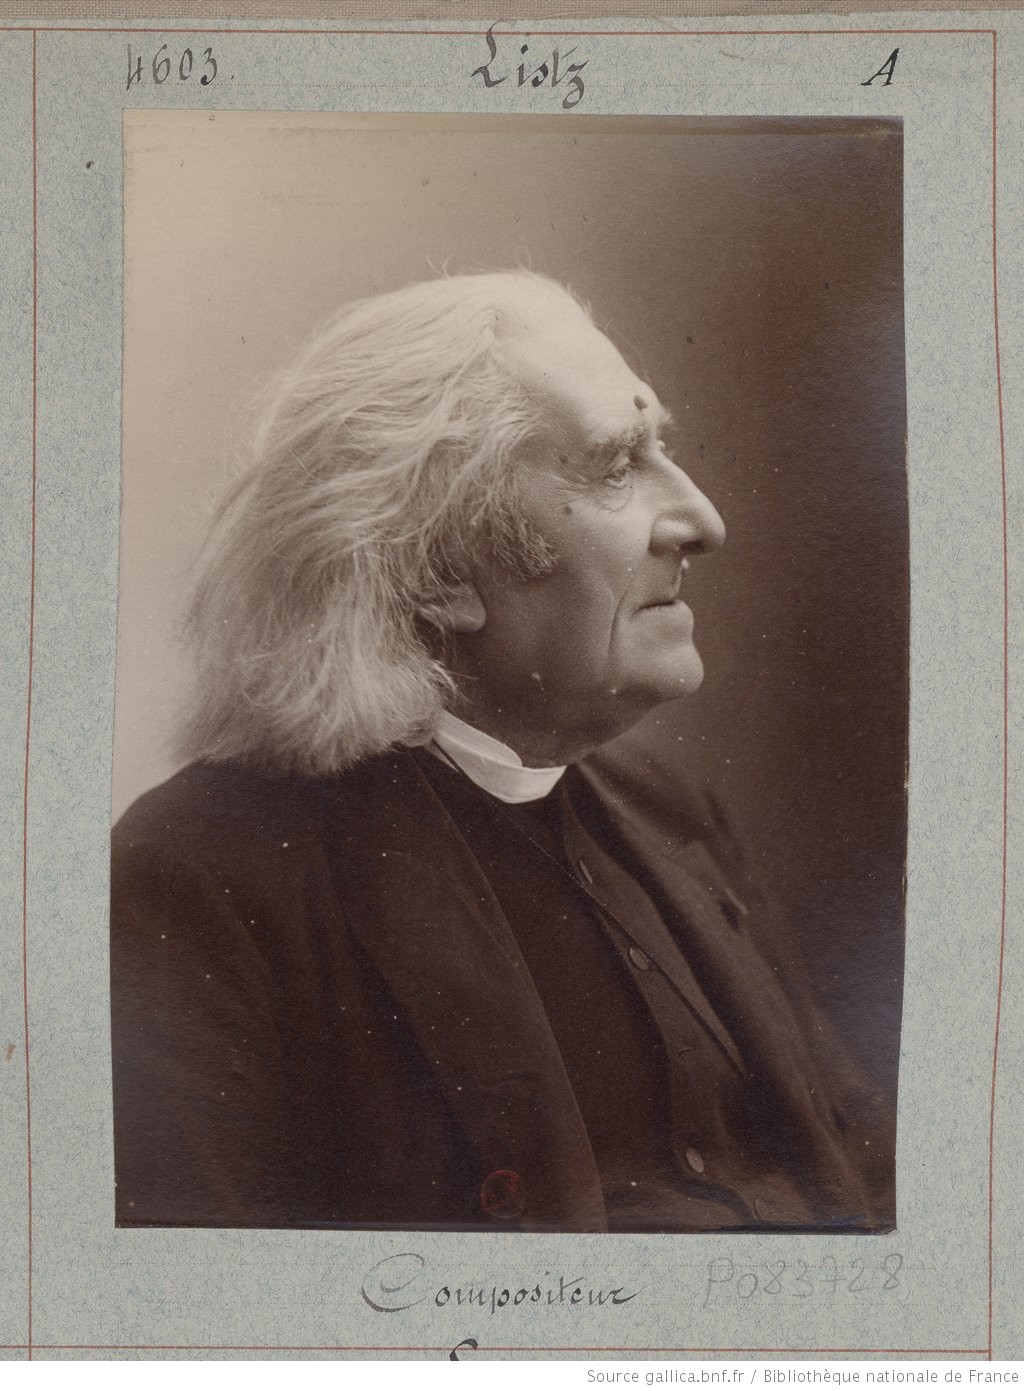 Liszt portrait number 2 in black and white taken by Nadar